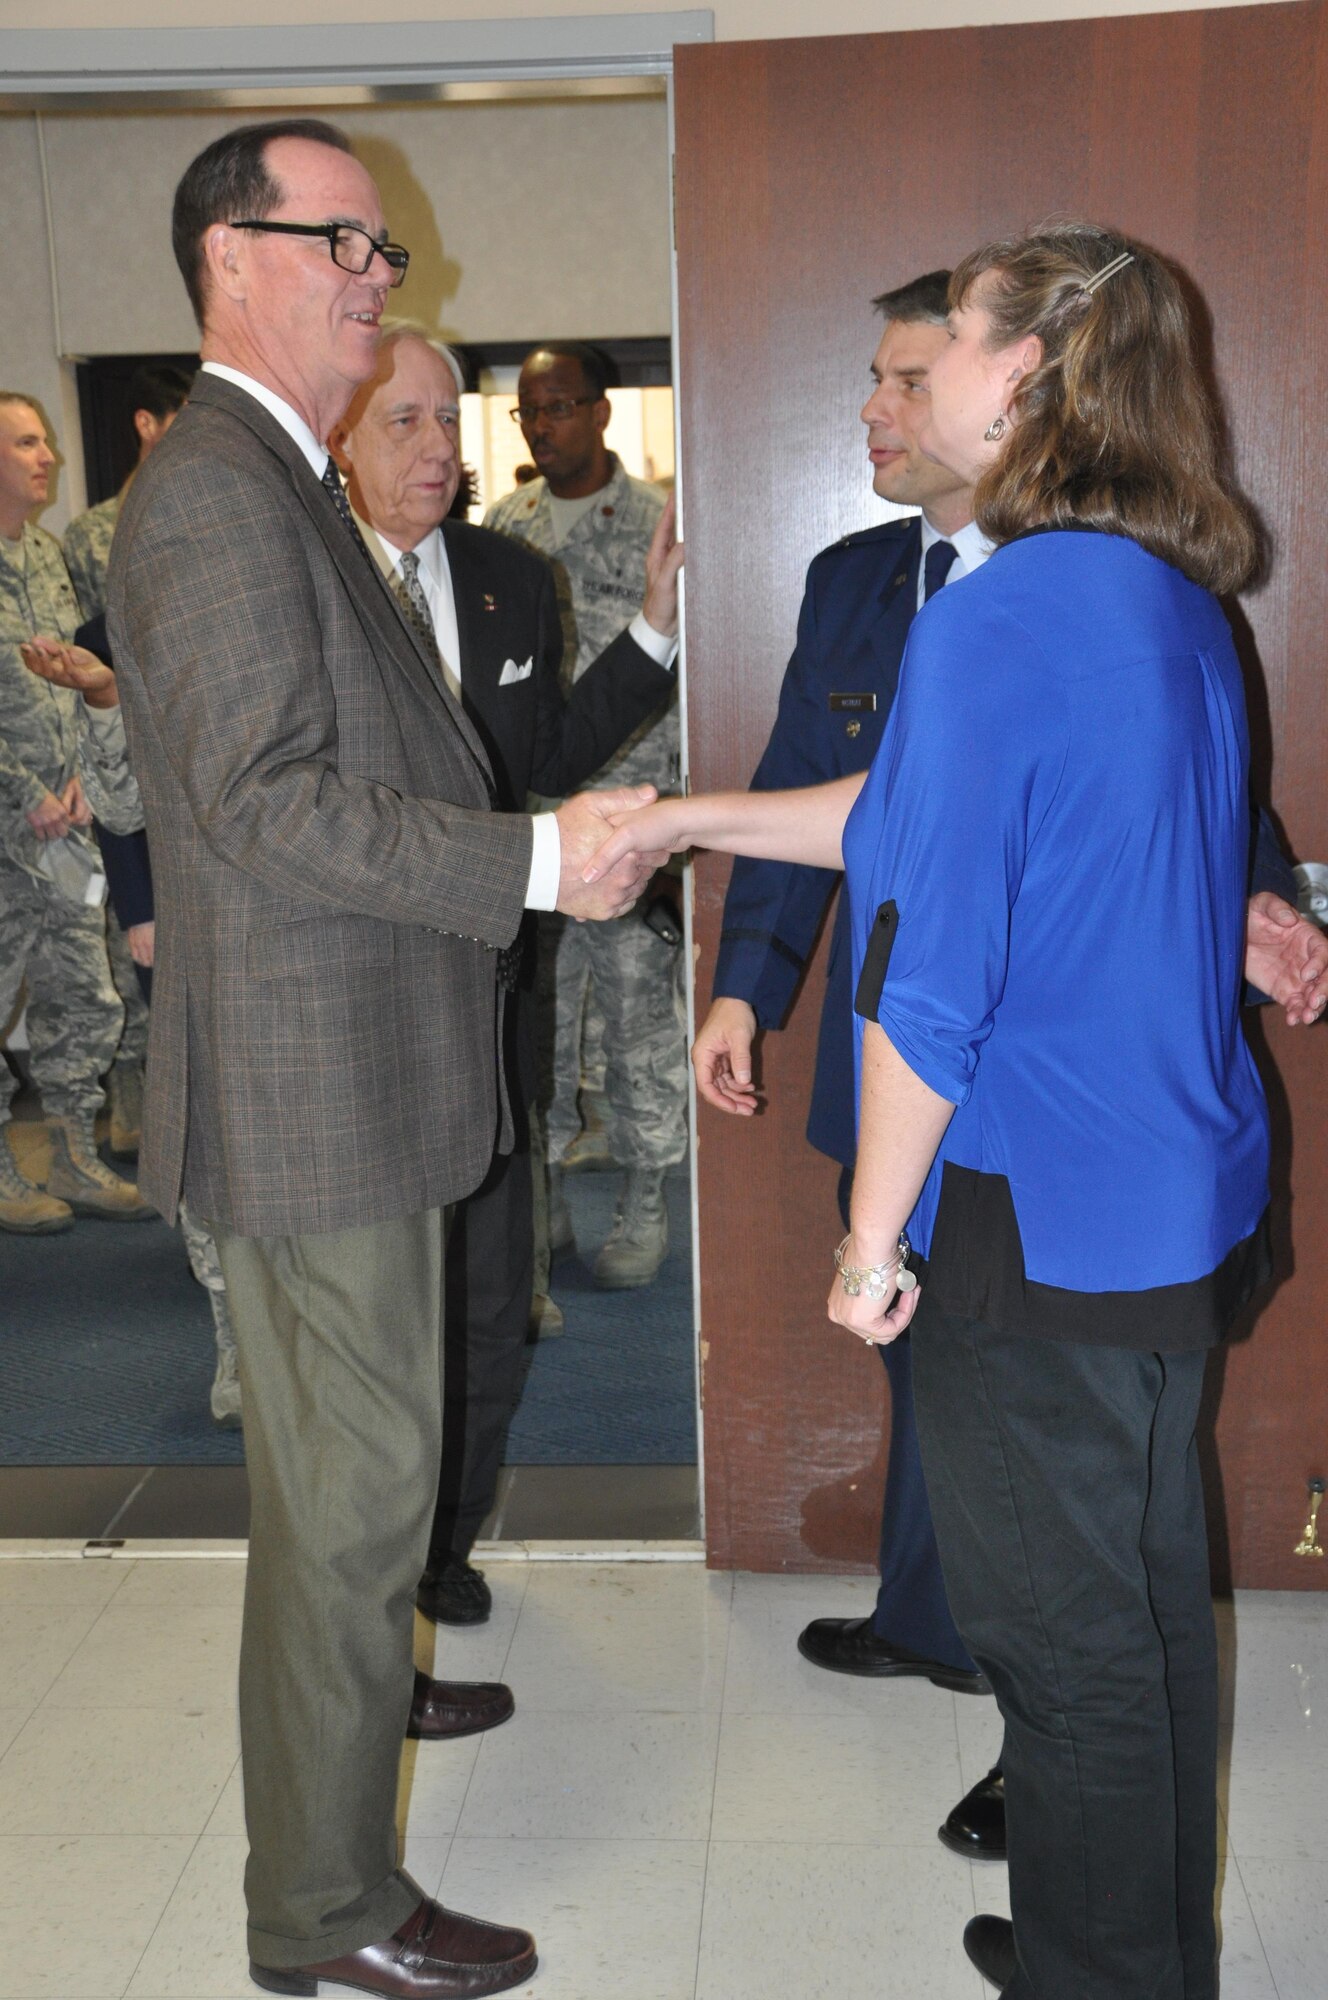 Joe Green, staff member of the Montgomery Chamber of Commerce, shakes hands with Lora Ostrat, while Tom Albrecht, Montgomery civic leader chats with newly minted commander of the 908th Airlift Wing, Col. Ken Ostrat. Green and Albrecht congratulated the Ostrats following his Assumption of Command ceremony March 5 at Maxwell Air Force Base. (U.S. Air Force photo by Bradley J. Clark)